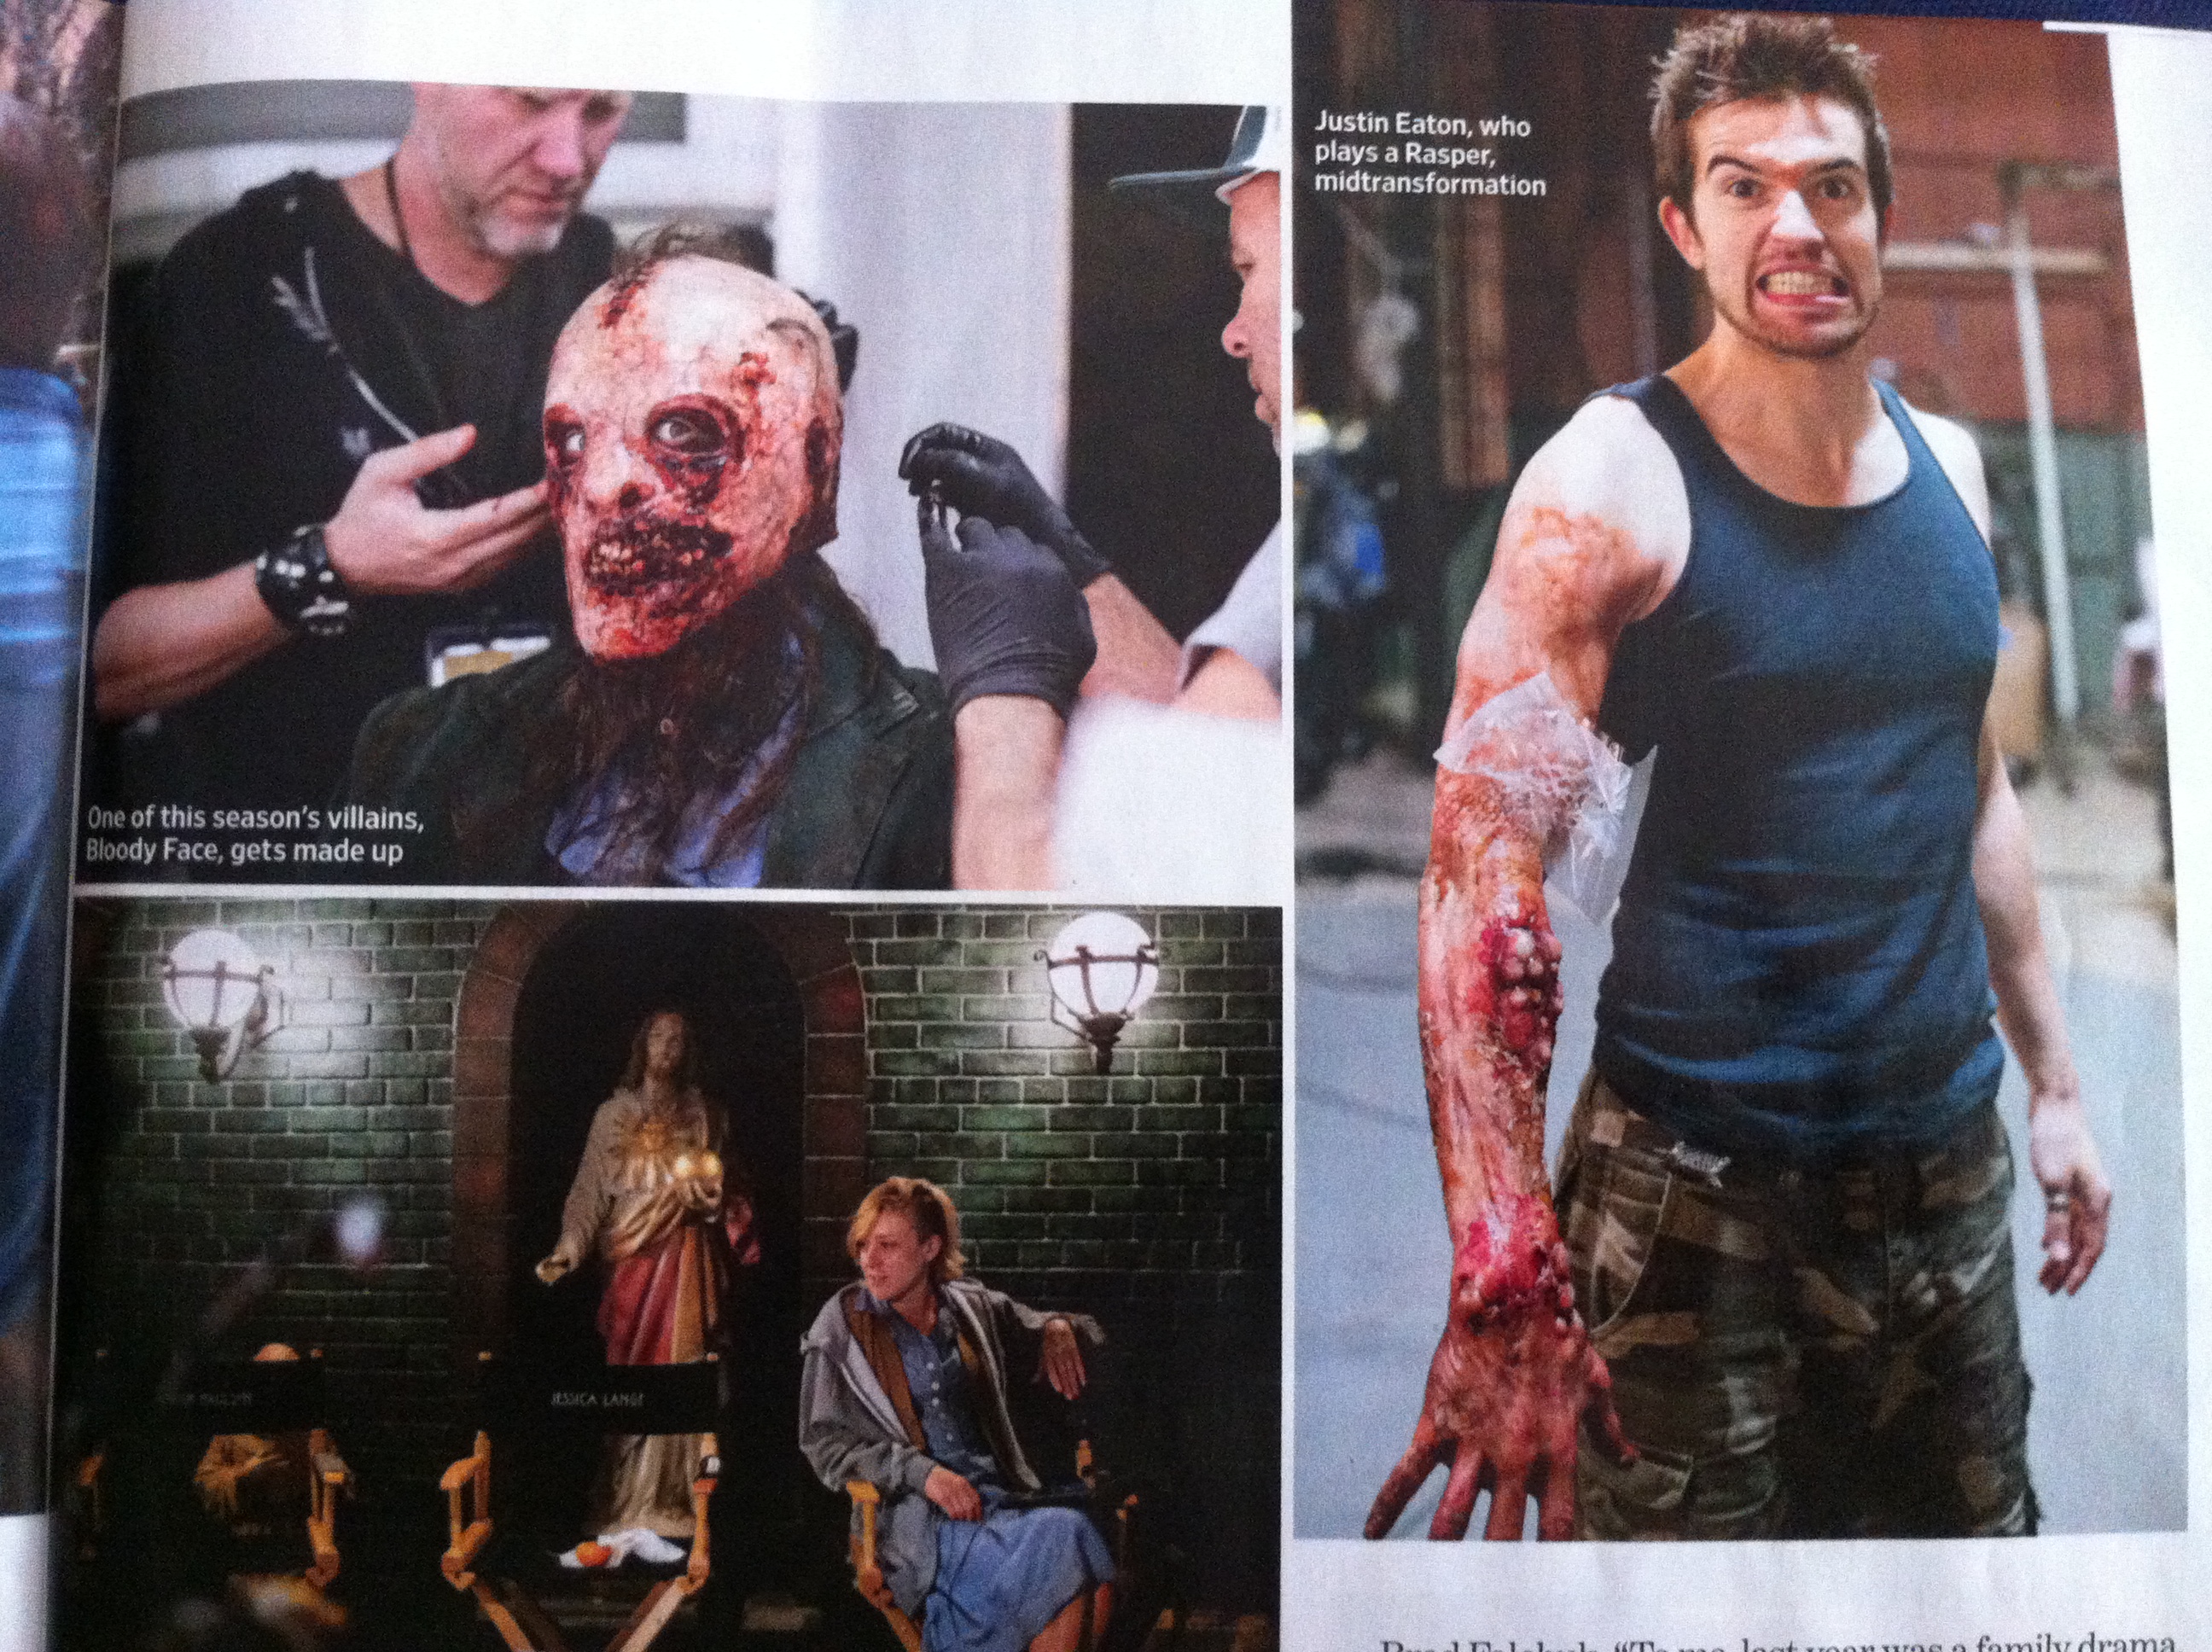 Entertainment Weekly - Tim Stack Justin Eaton - Rasper & BloodyFace American Horror Story: Asylum A Tim Stack article.